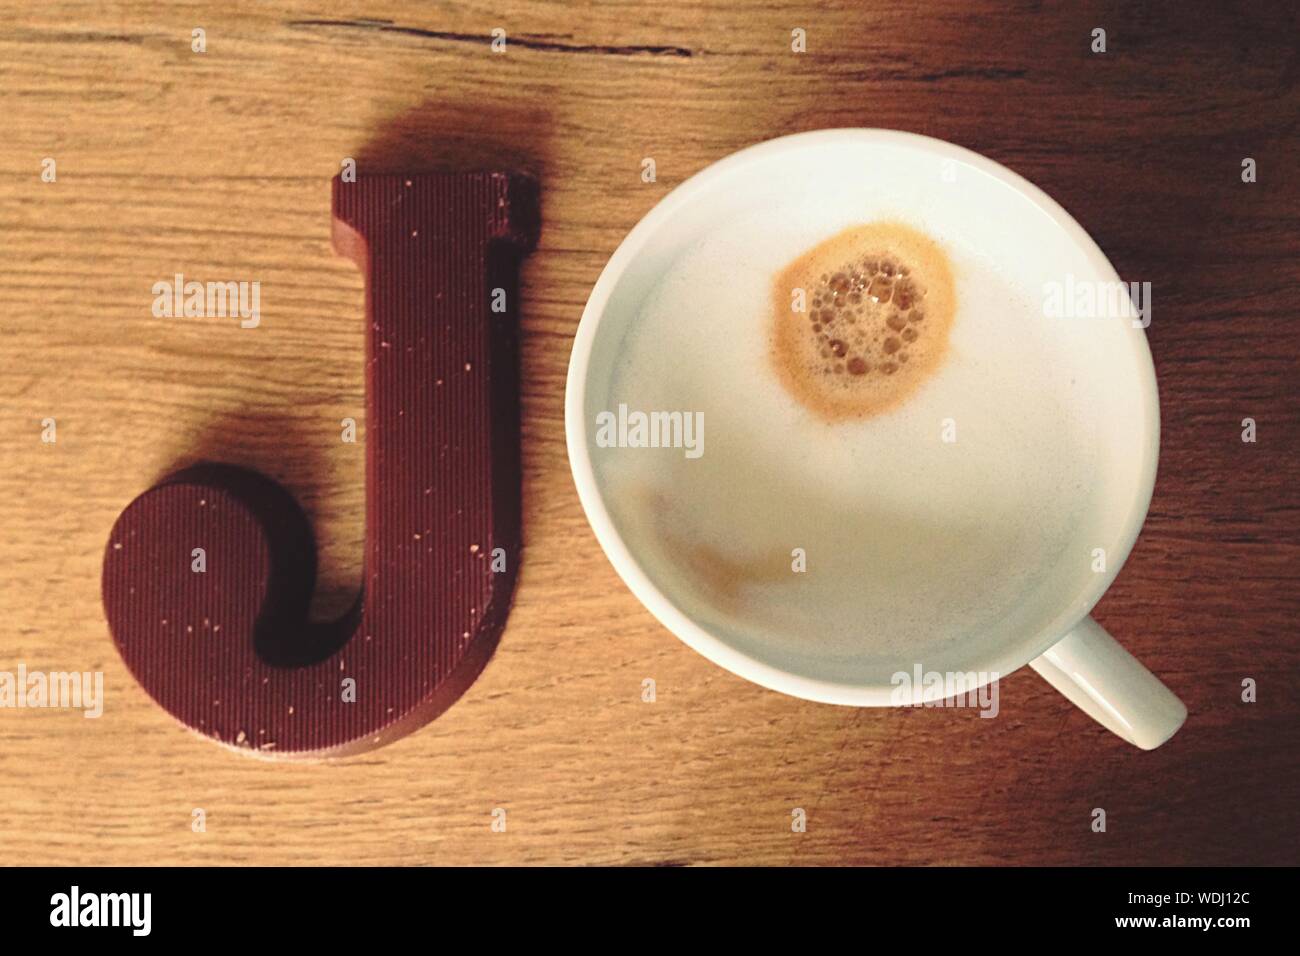 Cup Of Coffee And Chocolate Letter J Stock Photo - Alamy